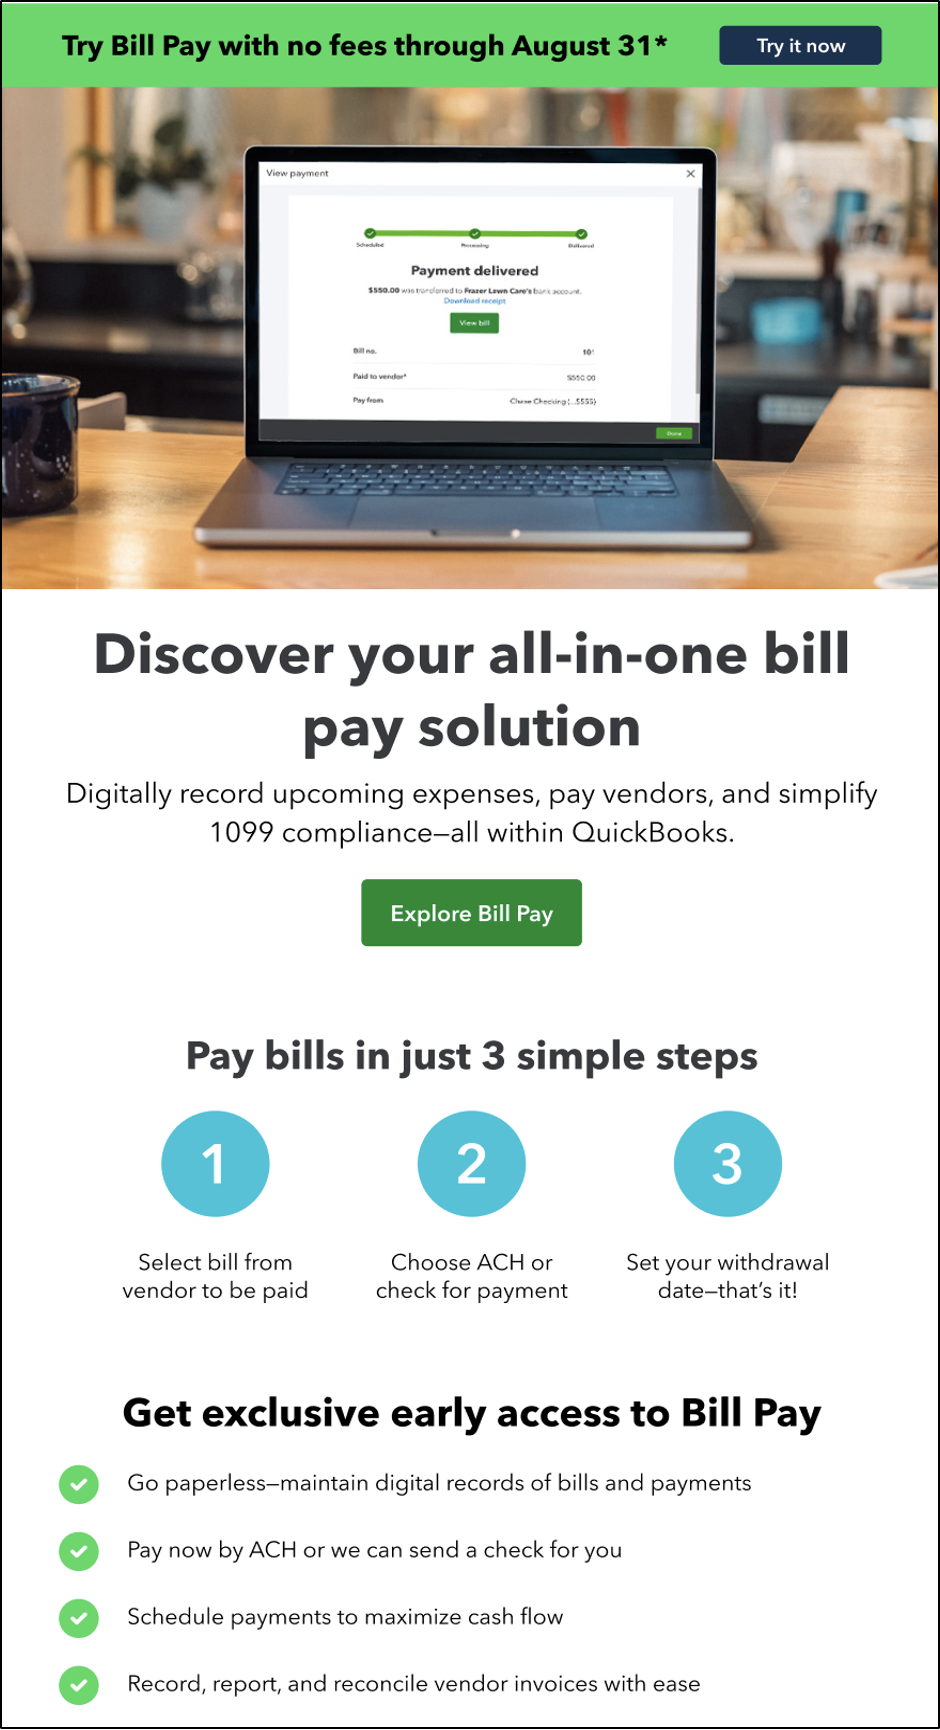 QuickBooks Bill Pay is now live to a limited audience